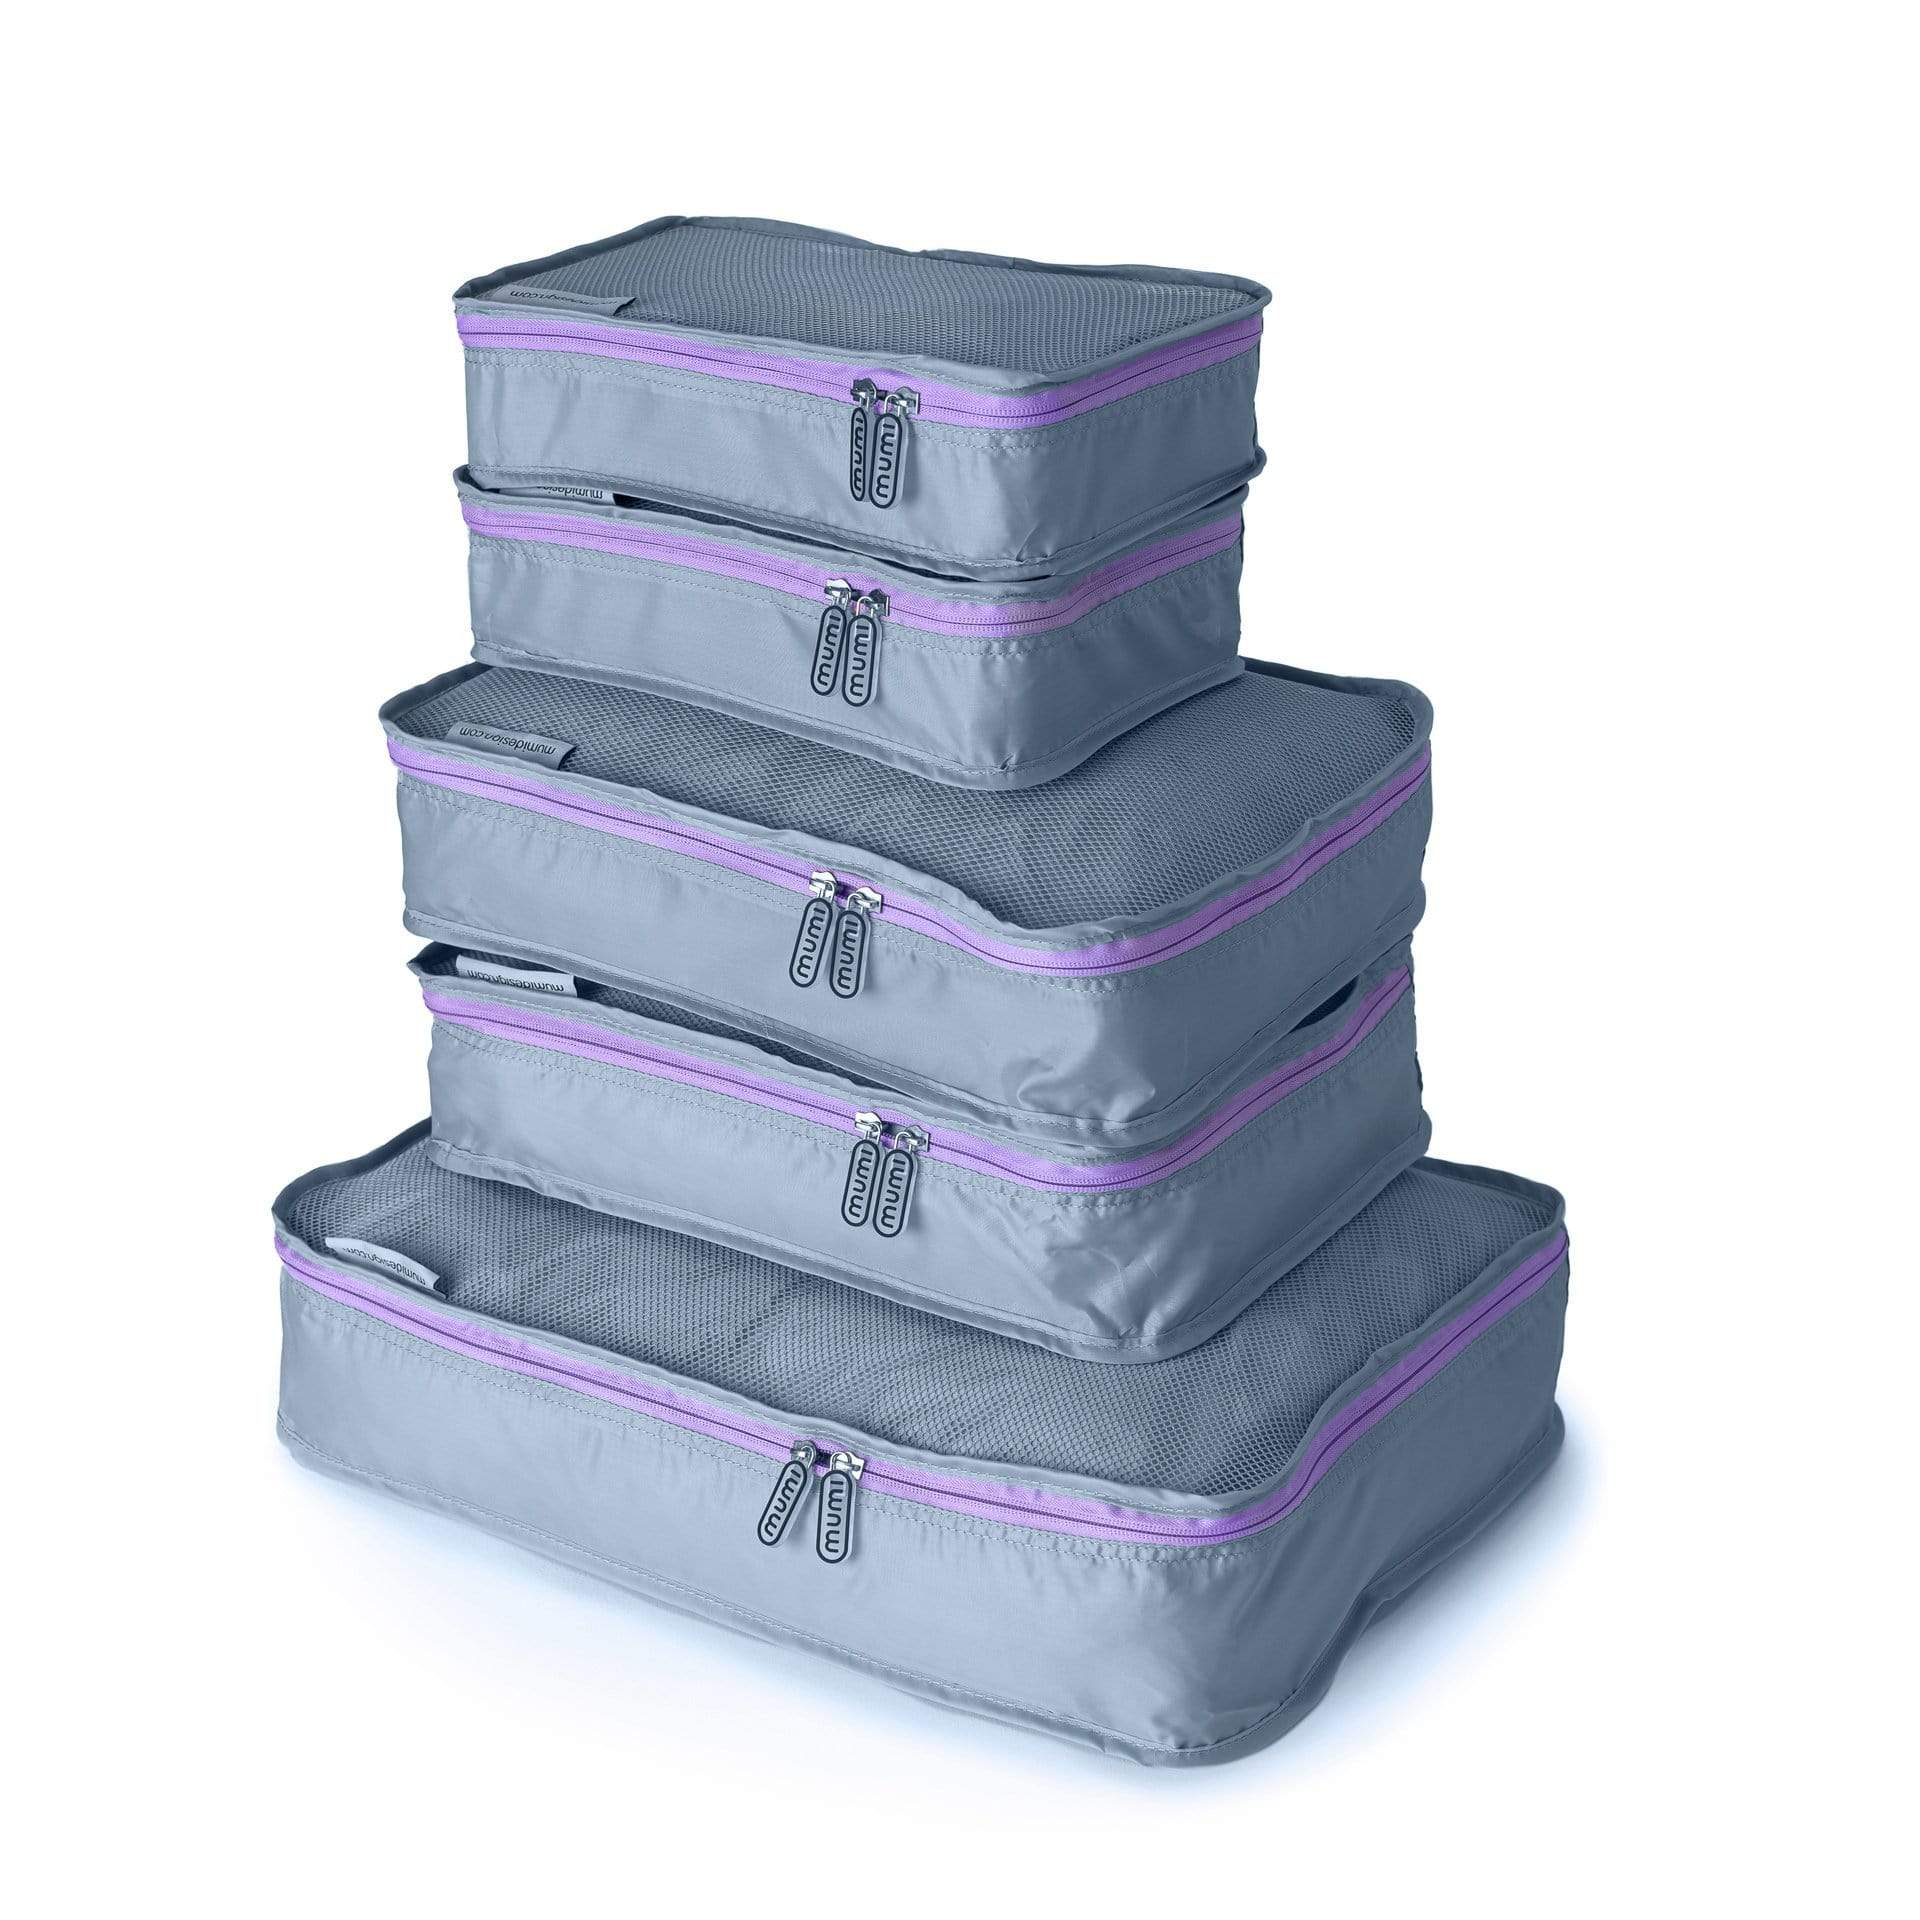 mumi PACKING CUBES purple packing cubes (set of 5)